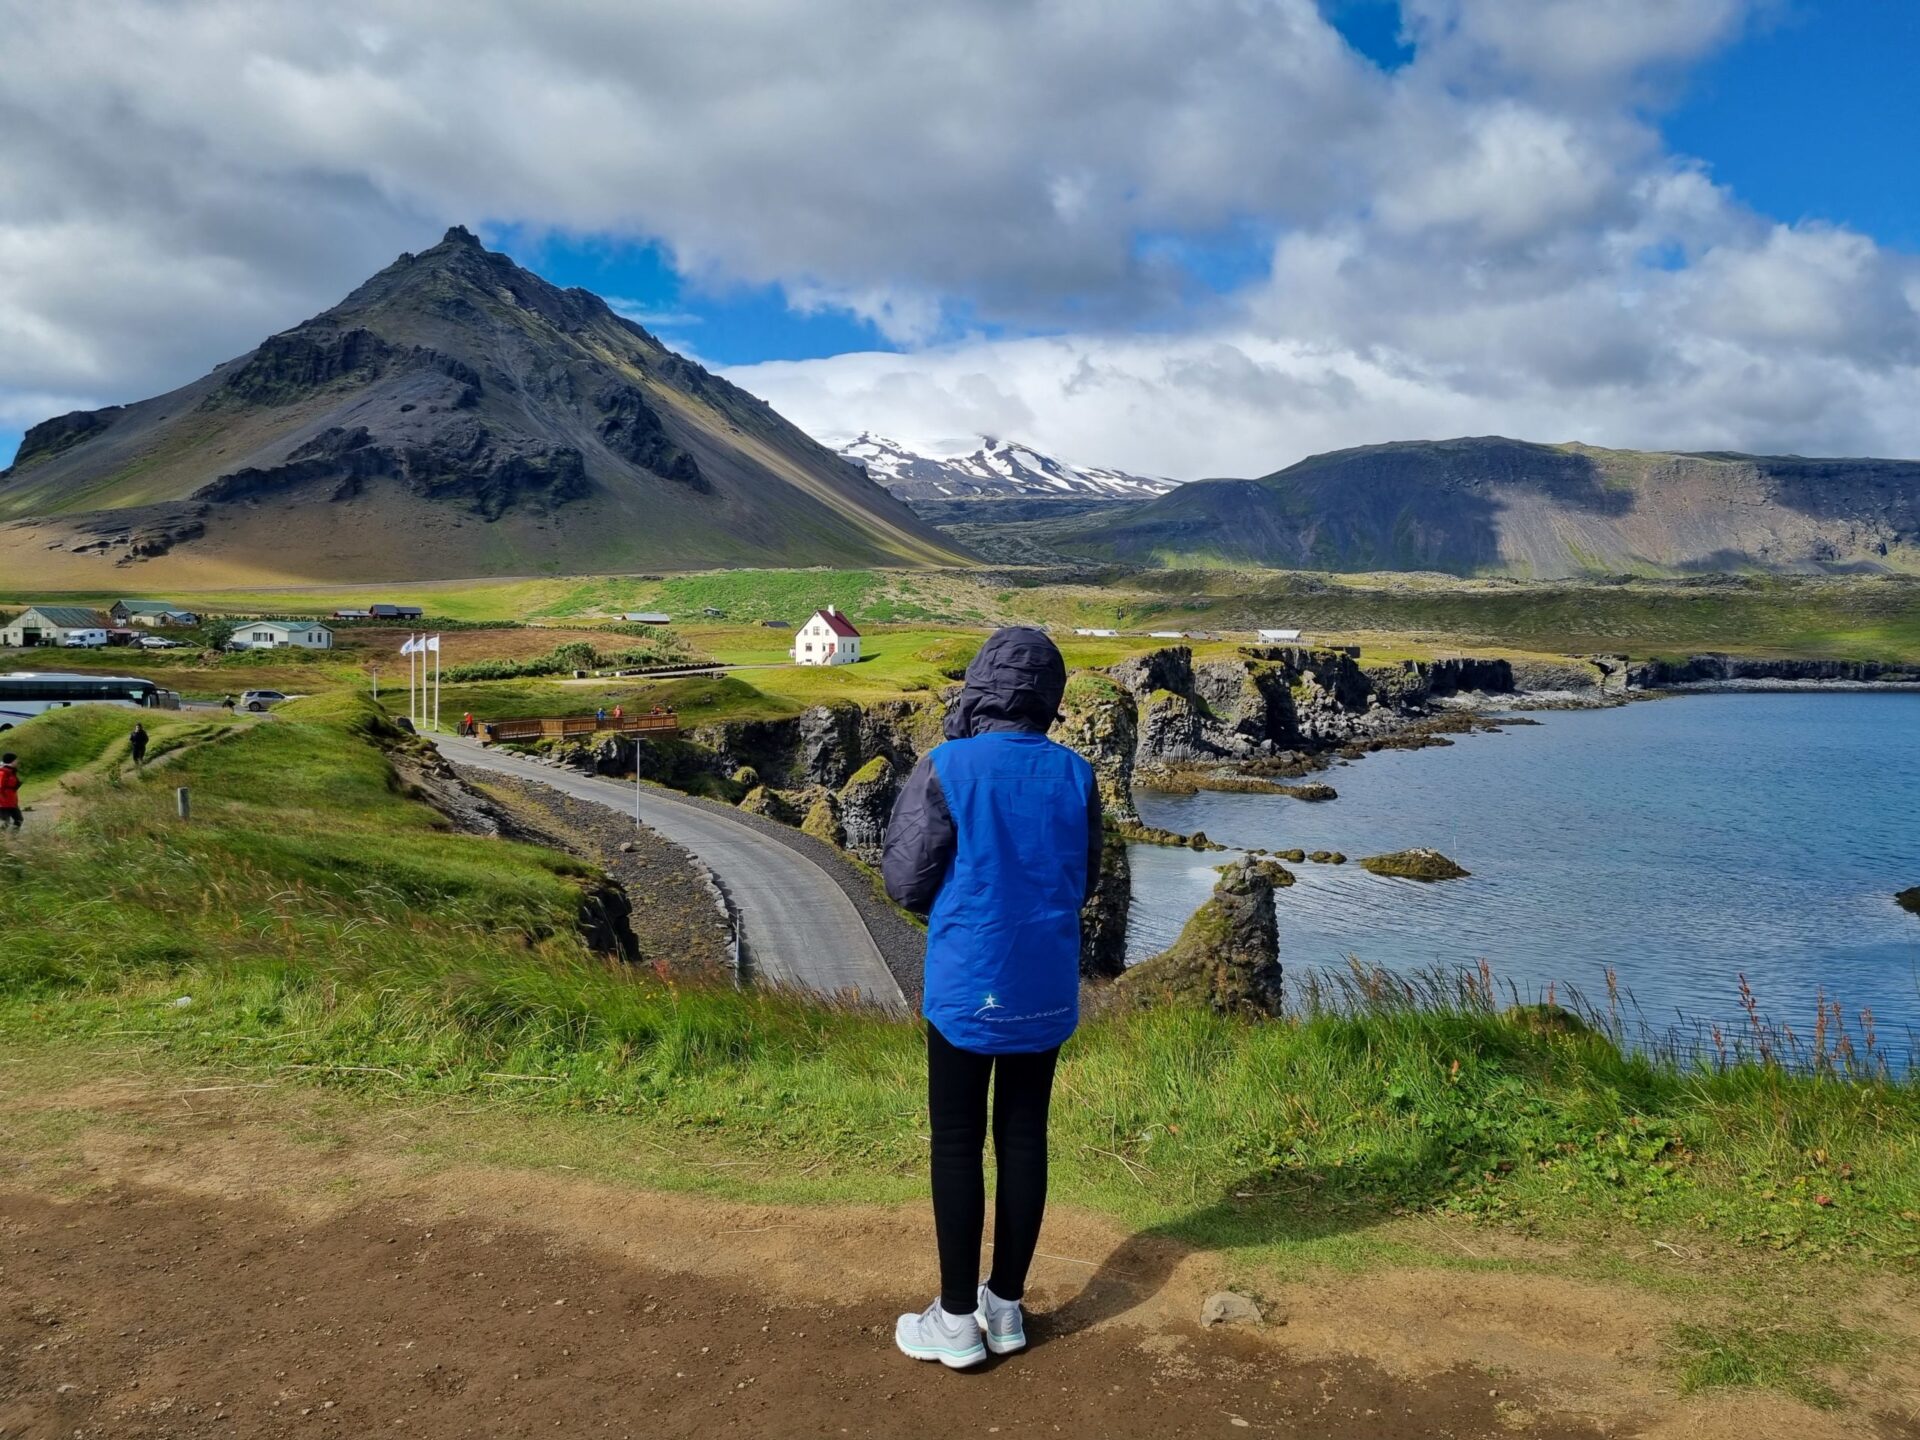 Expeditioner admiring the town of Arnastarpi in West Iceland